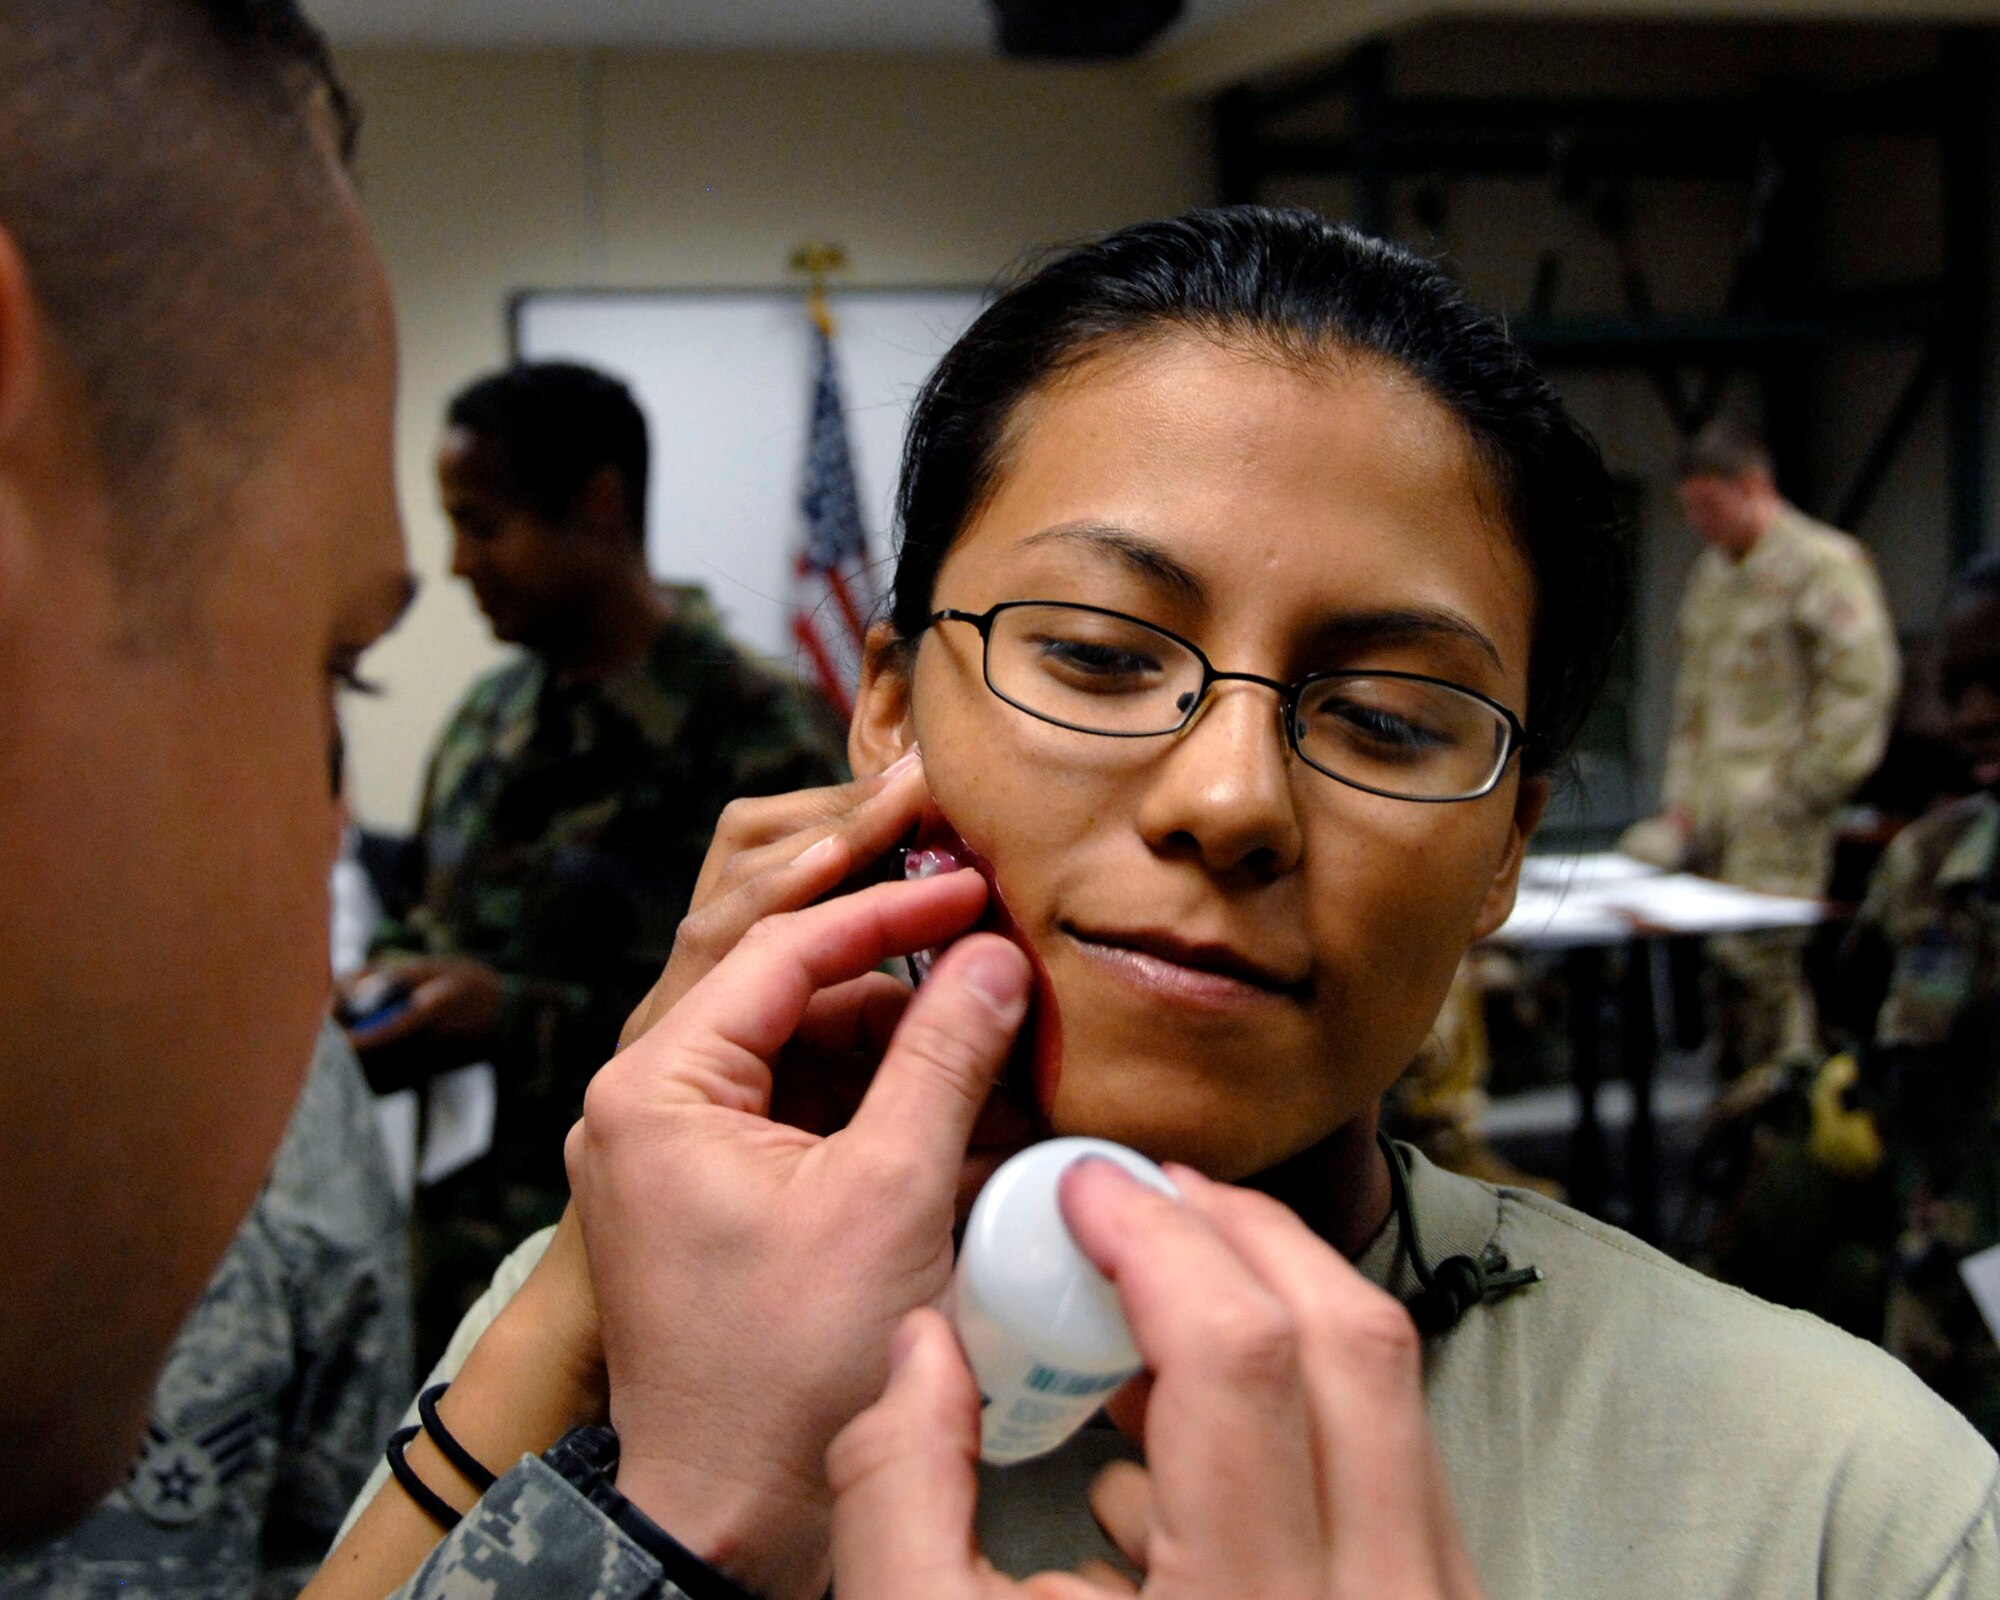 Tech Sgt. Wayne Johnson, with the 336th Training Group based out of Fairchild Air Force Base, Wash., applies simulated injury makeup to Airman 1st Class Britney Garcia, with the 355th Logistics Readiness Squadron at Davis-Monthan AFB, Tucson, Ariz. before heading out to participate in an Angel Thunder combat search and rescue exercise scenario April 19, 2010. (U.S. Air National Guard photo/Airman 1st Class Jessica Green)